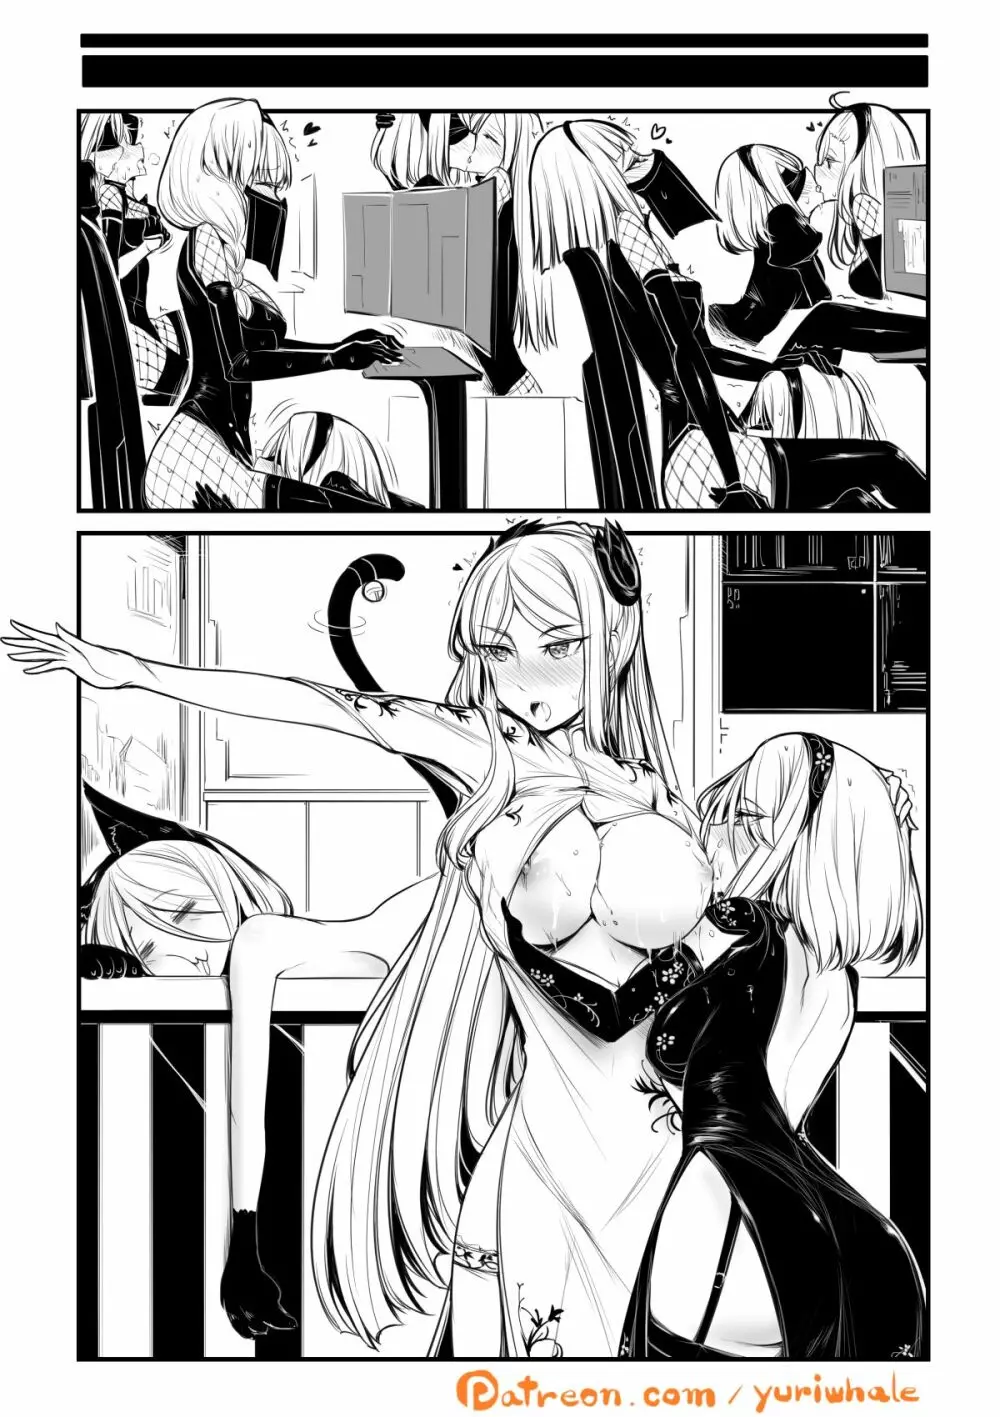 Nier : Automata Domina Commander X 2B X 6O 10 Pages Done - page11